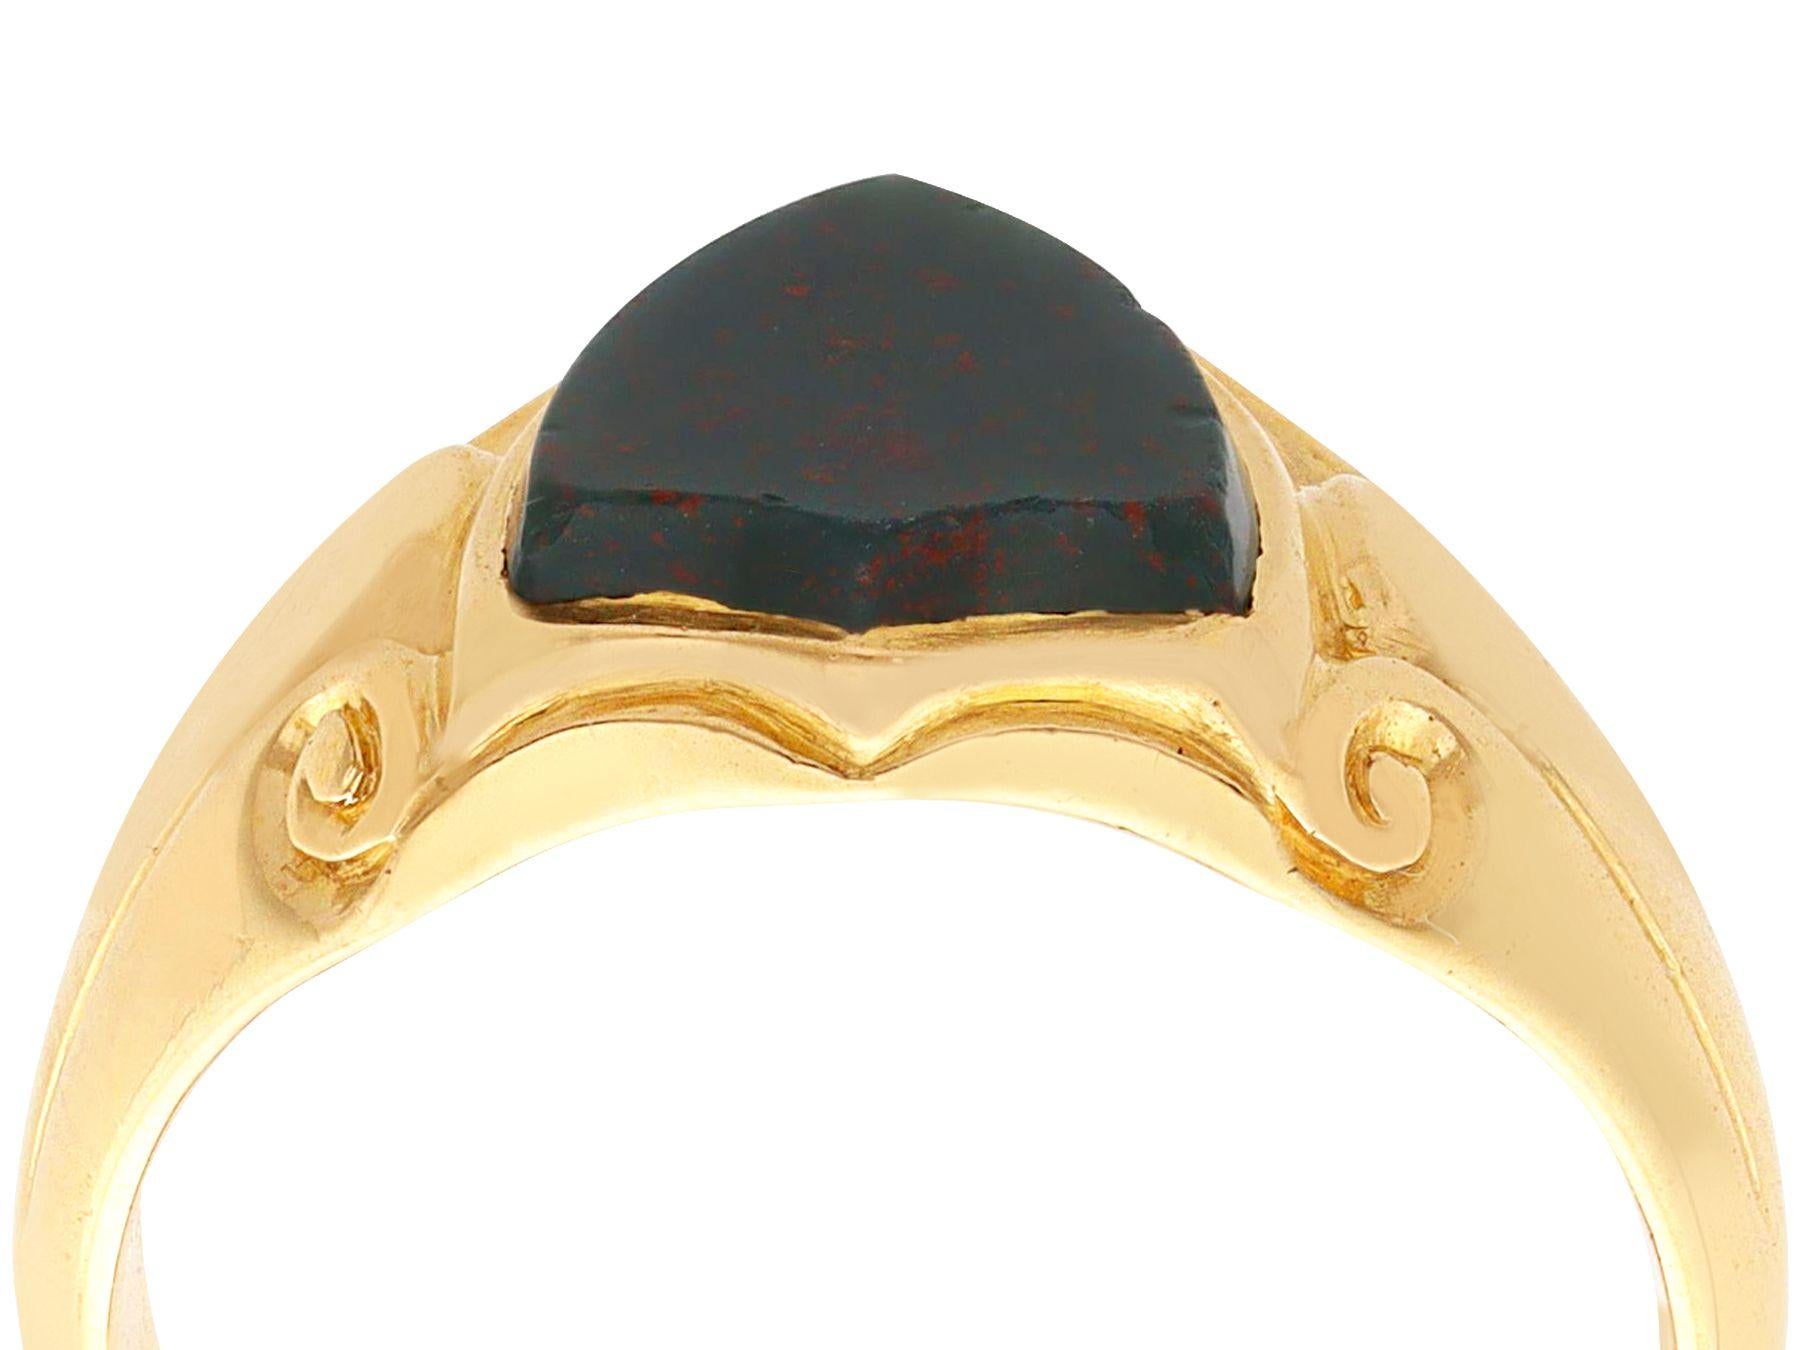 An exceptional, fine and impressive bloodstone and 18 karat yellow gold signet ring; part of our diverse antique jewellery and estate jewelry collections

This fine and impressive antique ring has been crafted in 18k yellow gold.

The ring displays